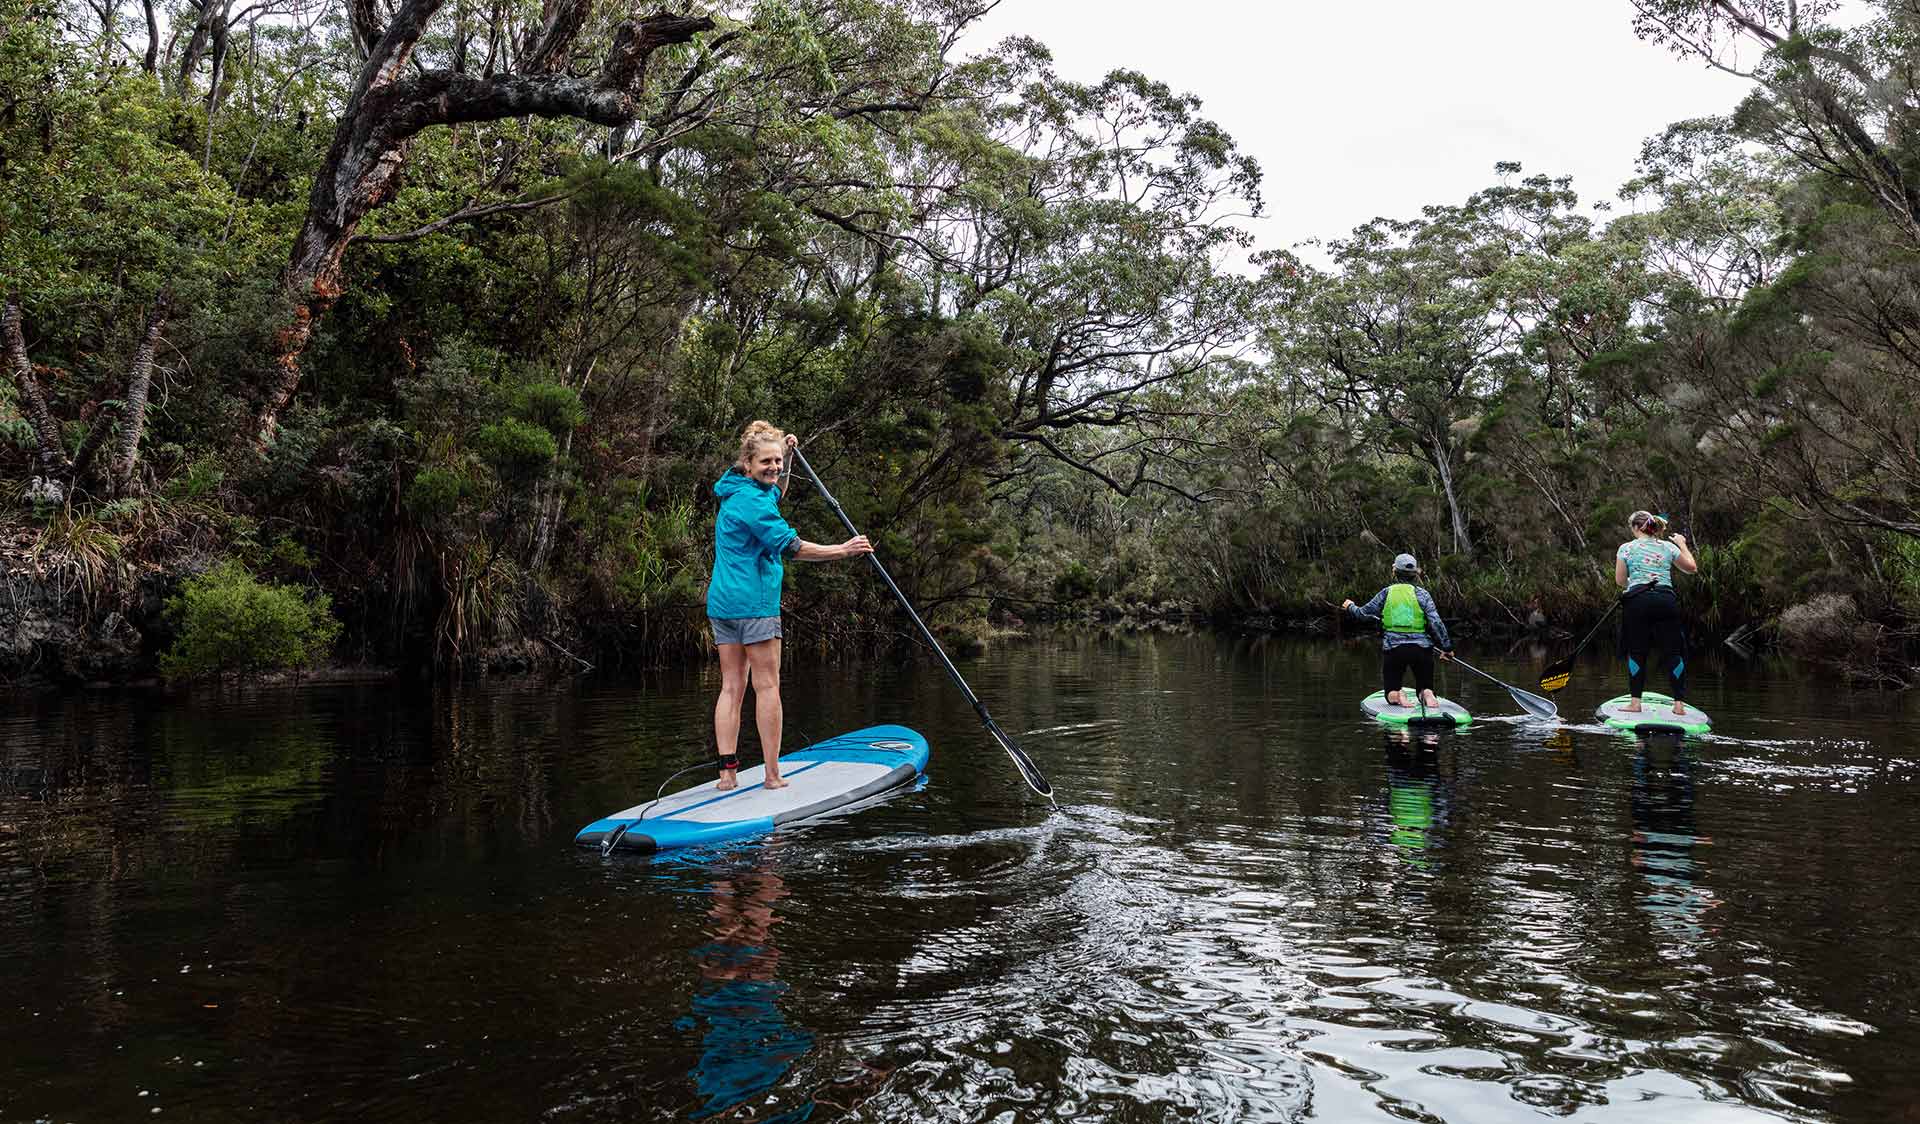 Three women on stand-up paddle boards paddle up the Yeerung River.